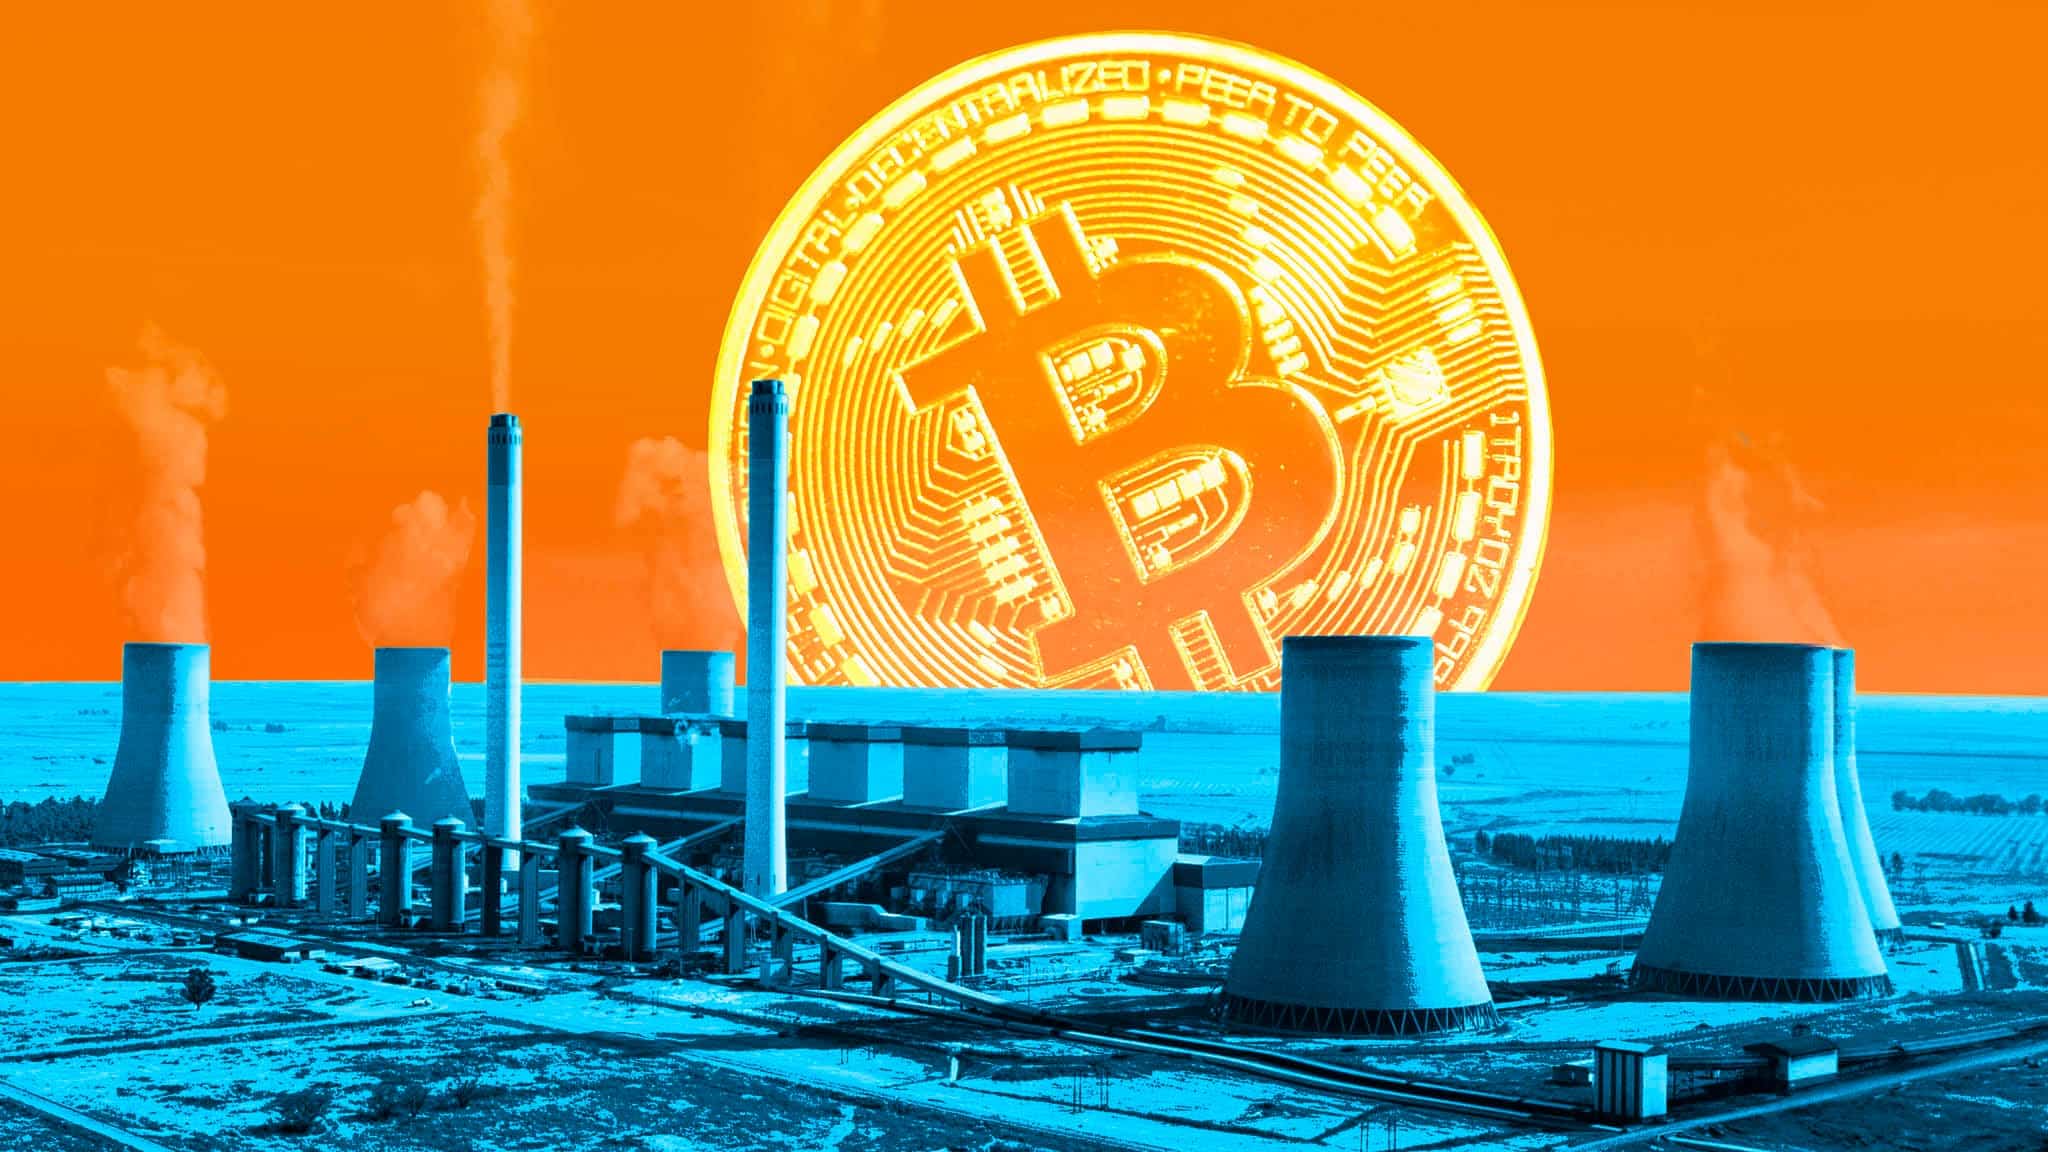 Bitcoin (BTC) is the worst cryptocurrency for the environment, study shows